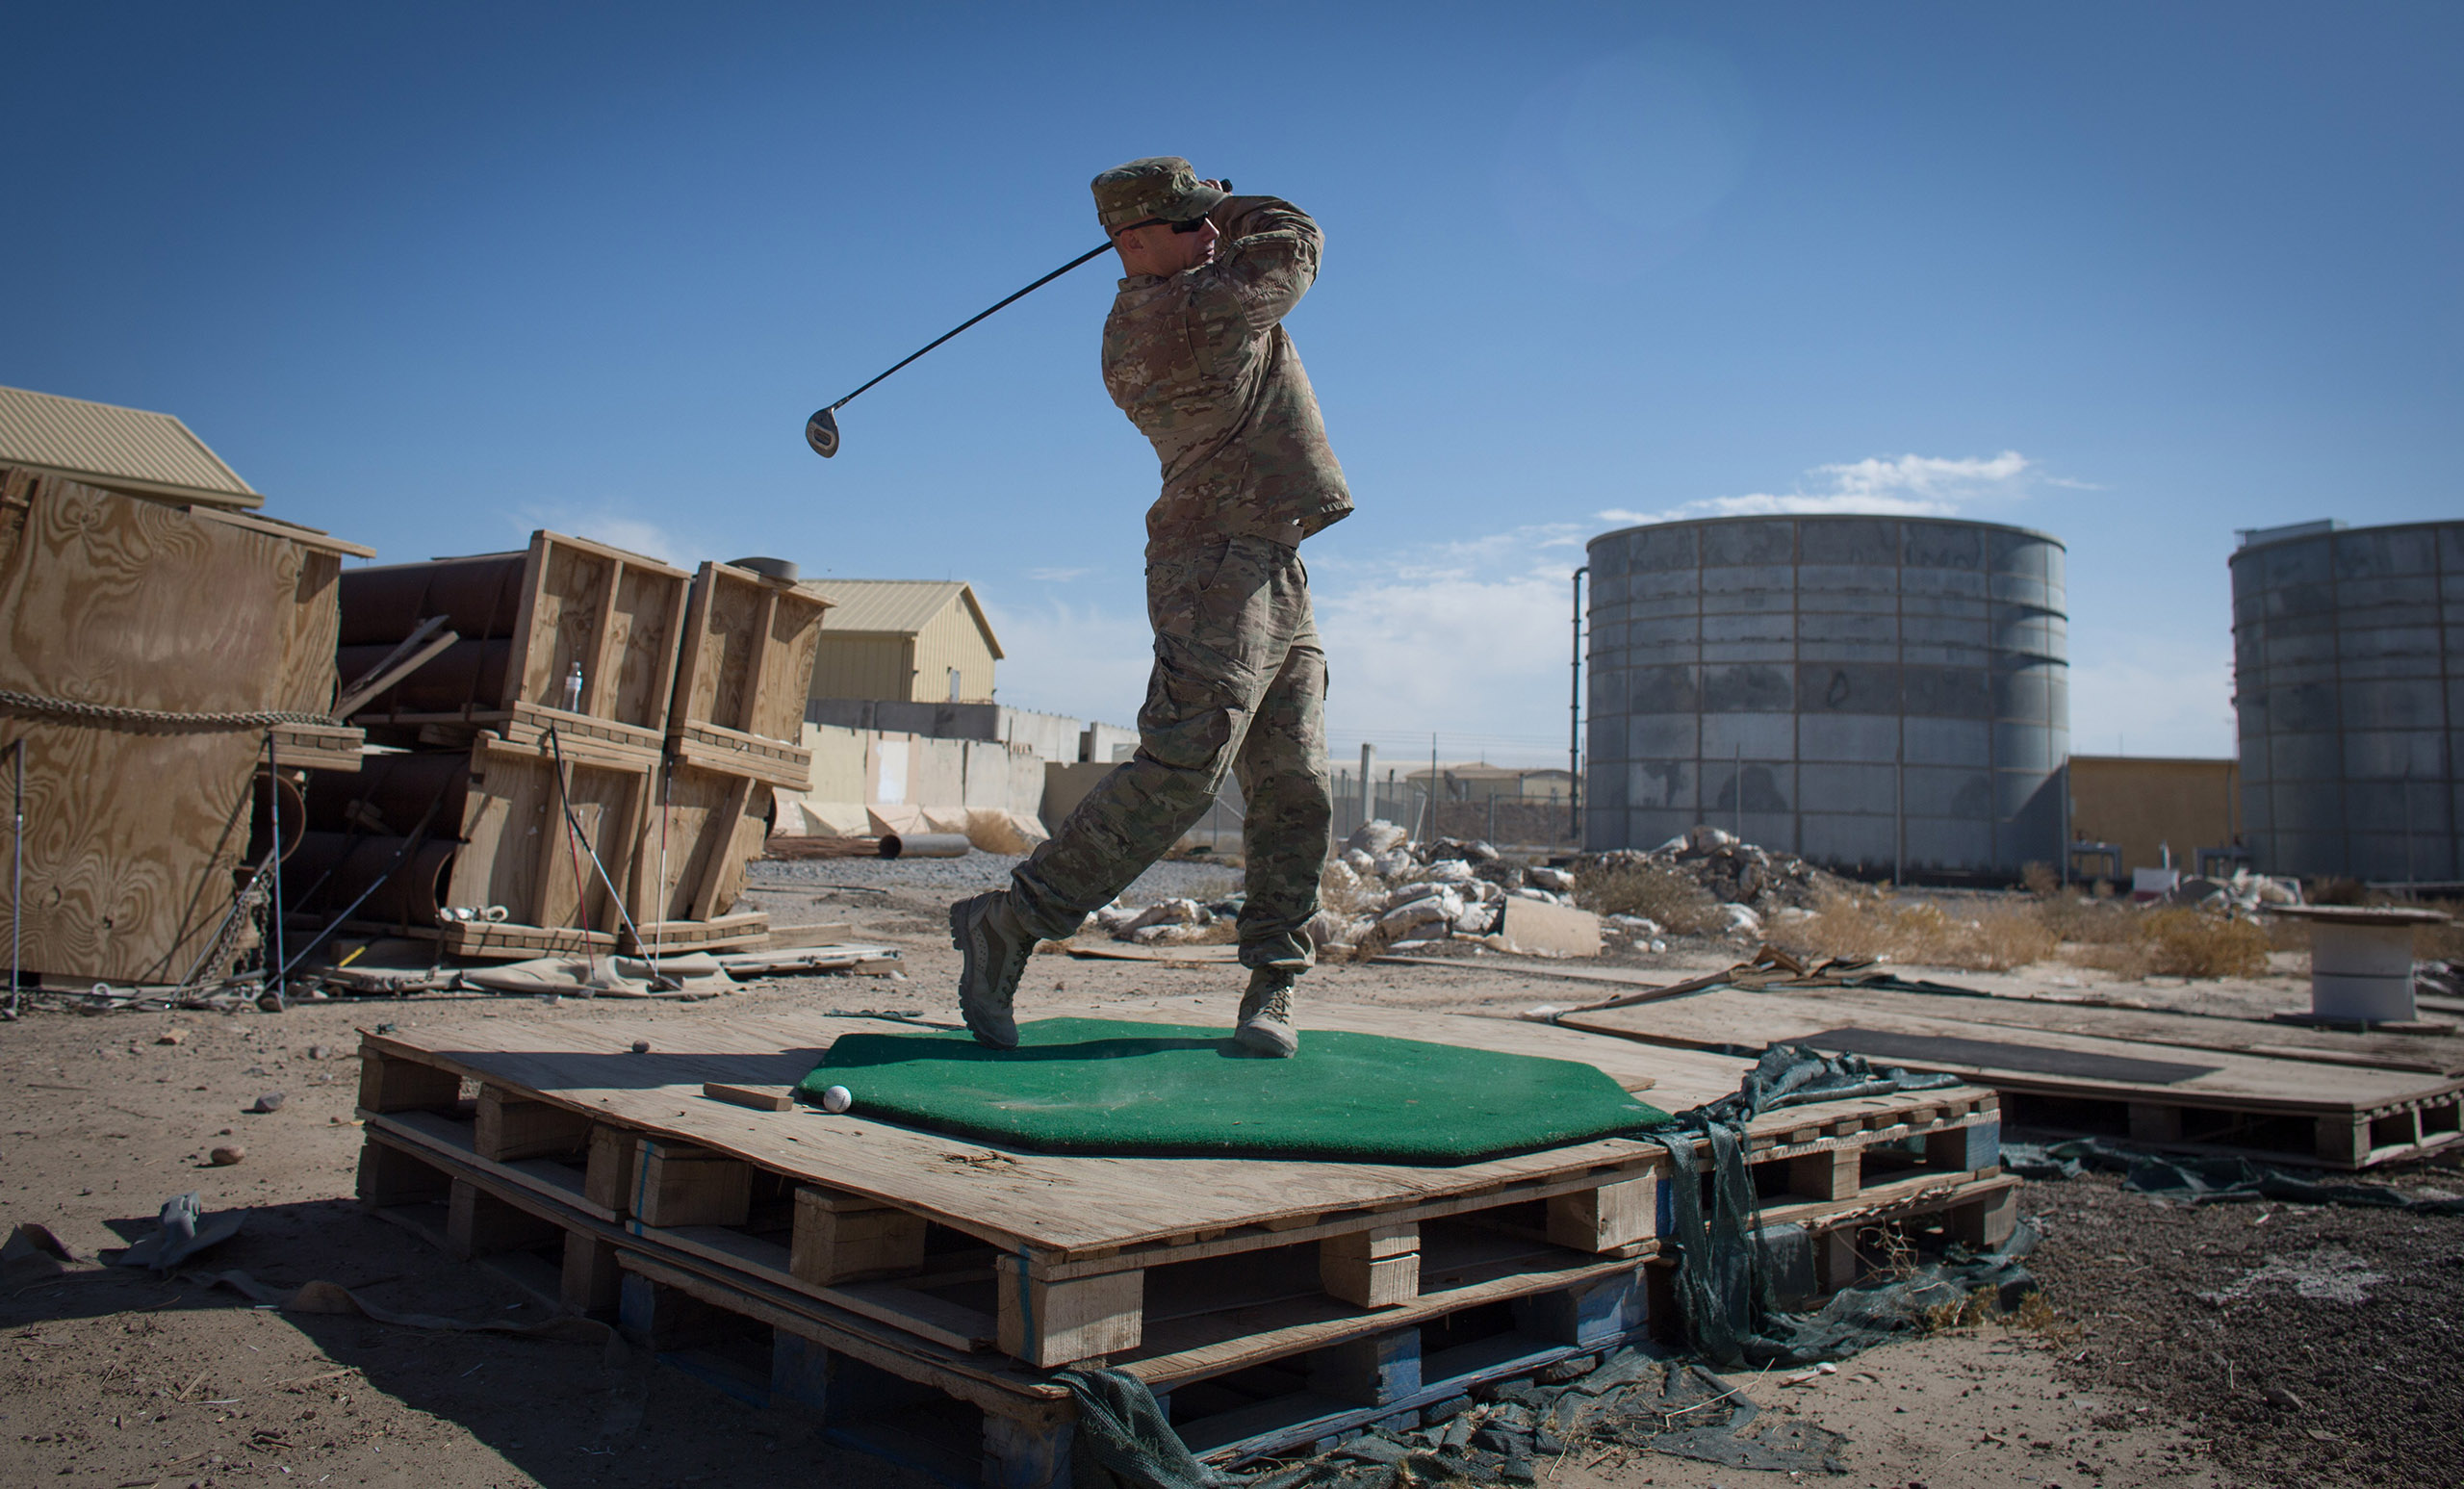 First sergeant Tony Quismundo from the US Army practices his golf on waste ground at Kandahar airfield on Nov. 10, 2014 in Kandahar, Afghanistan.